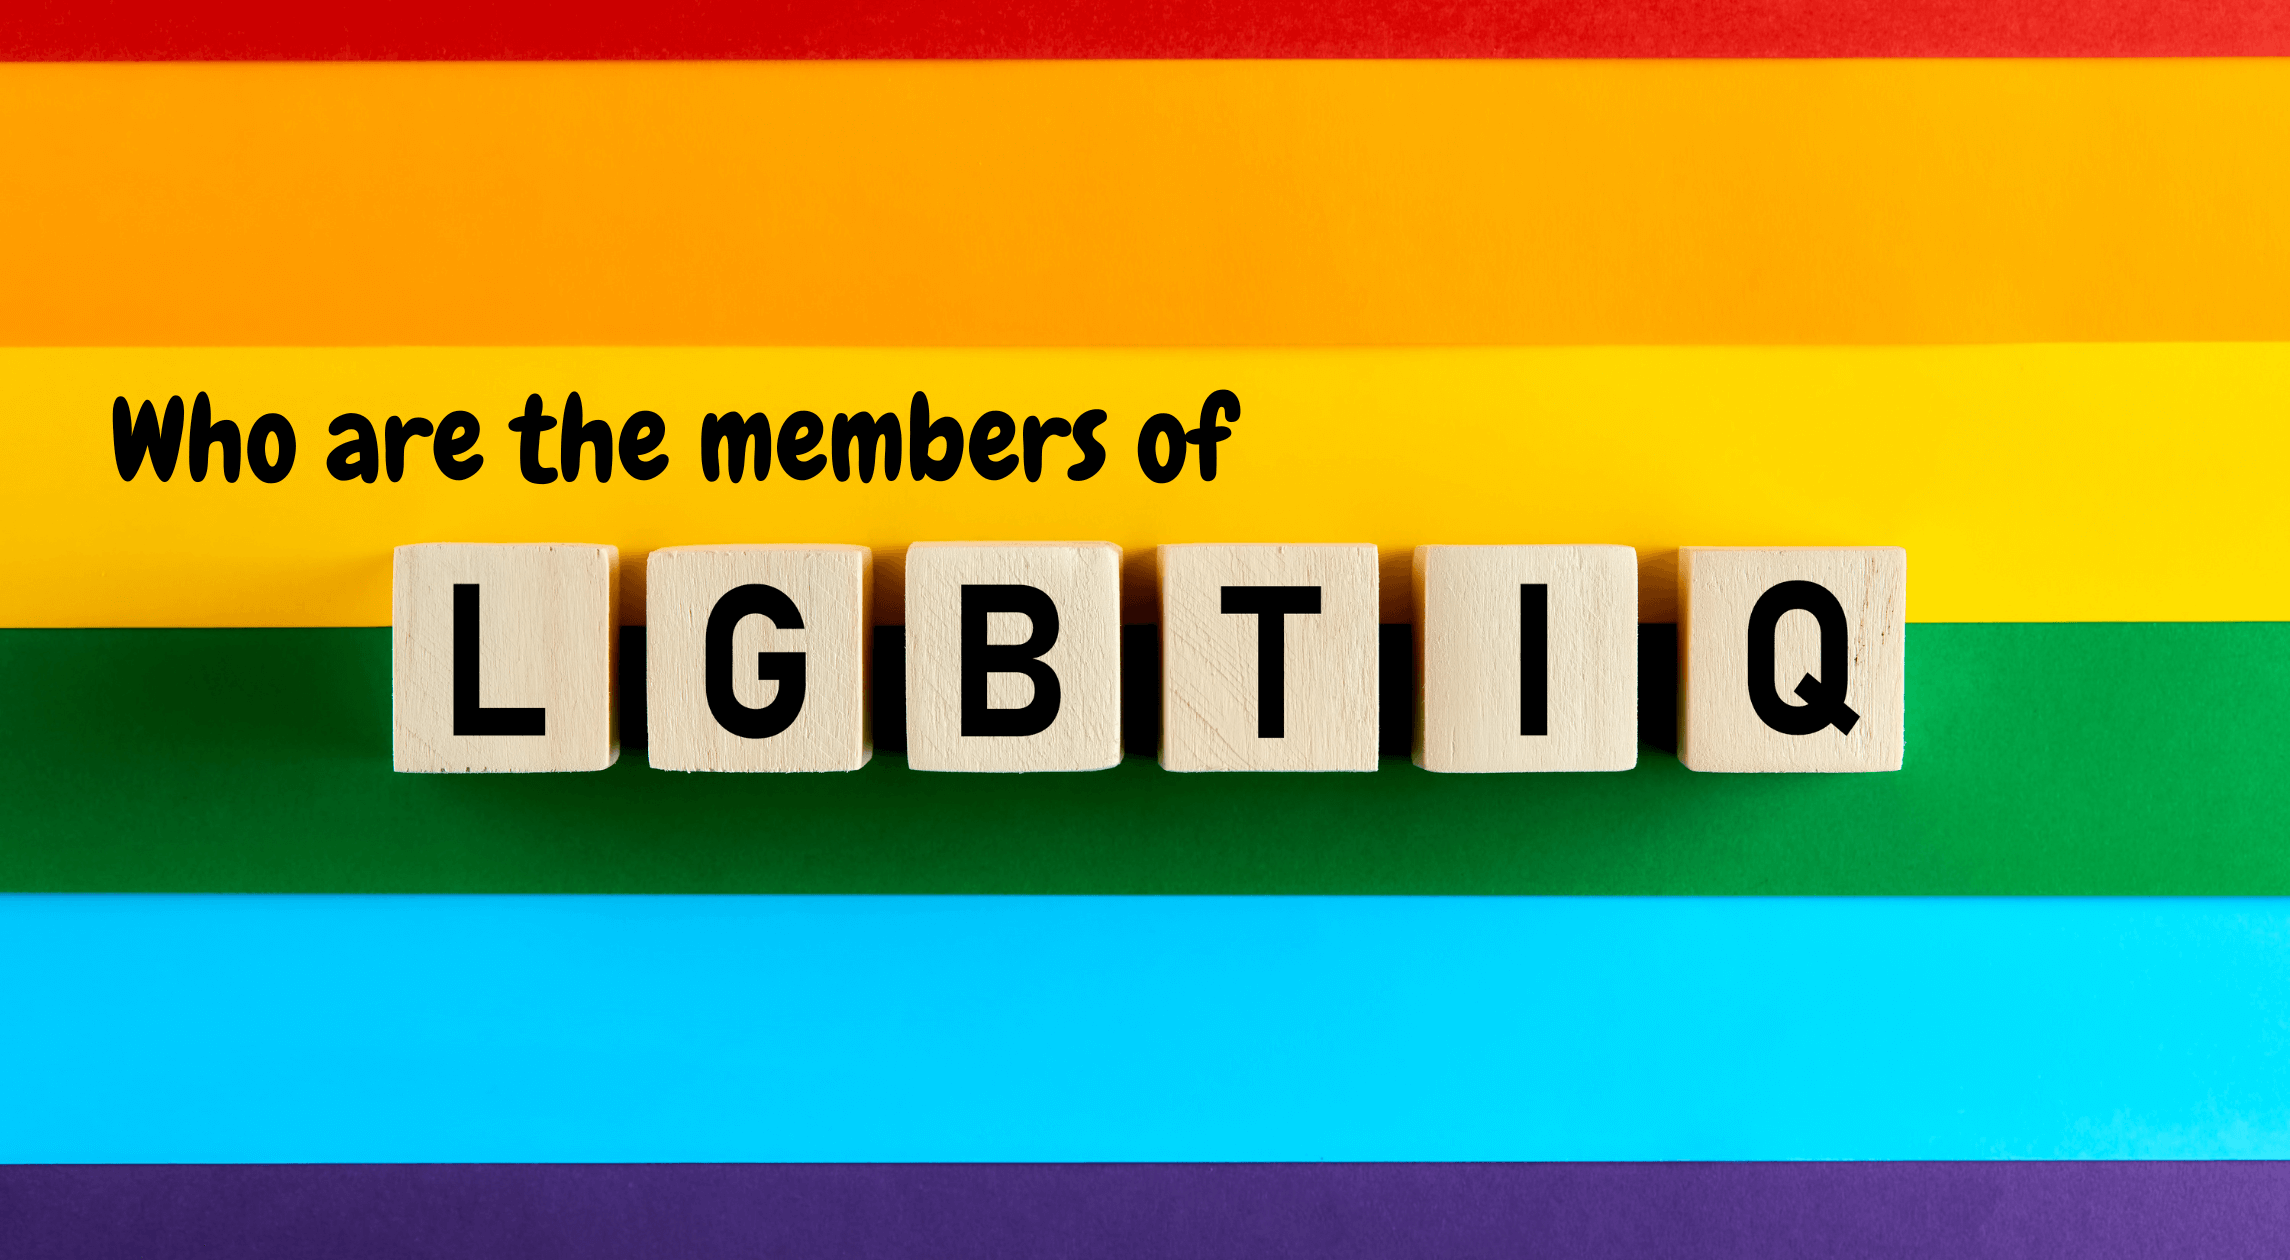 Who are the members of the LGBTIQ+ community